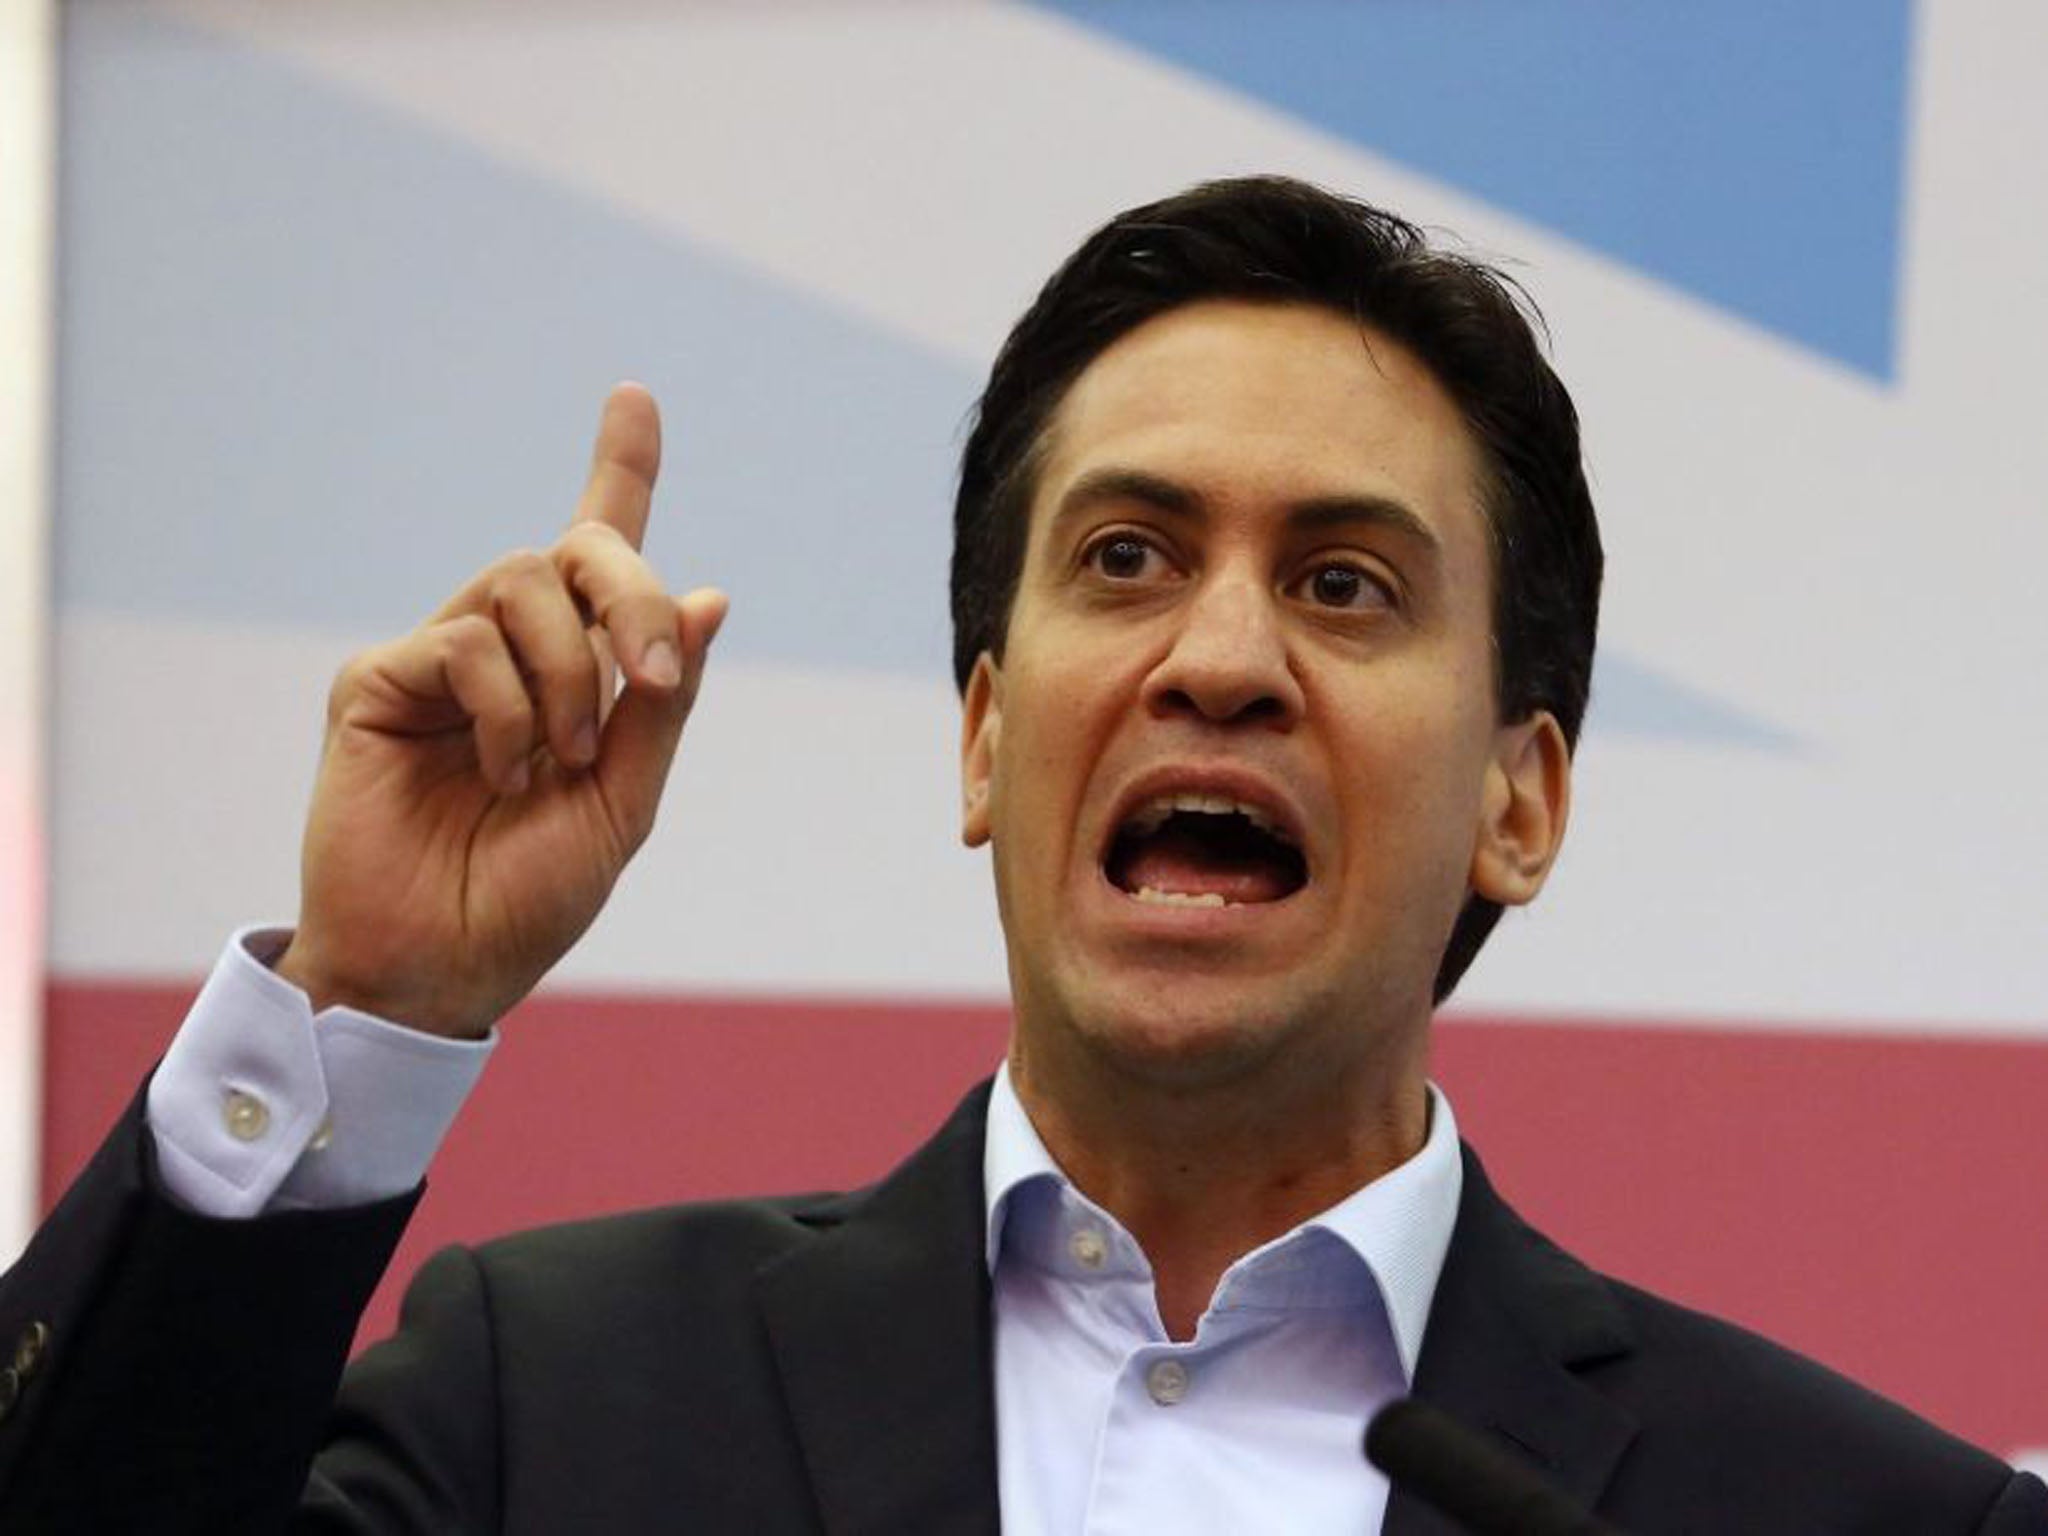 Labour leader Ed Miliband said his government would force companies that hire workers from outside the EU to take on the same number of UK apprentices